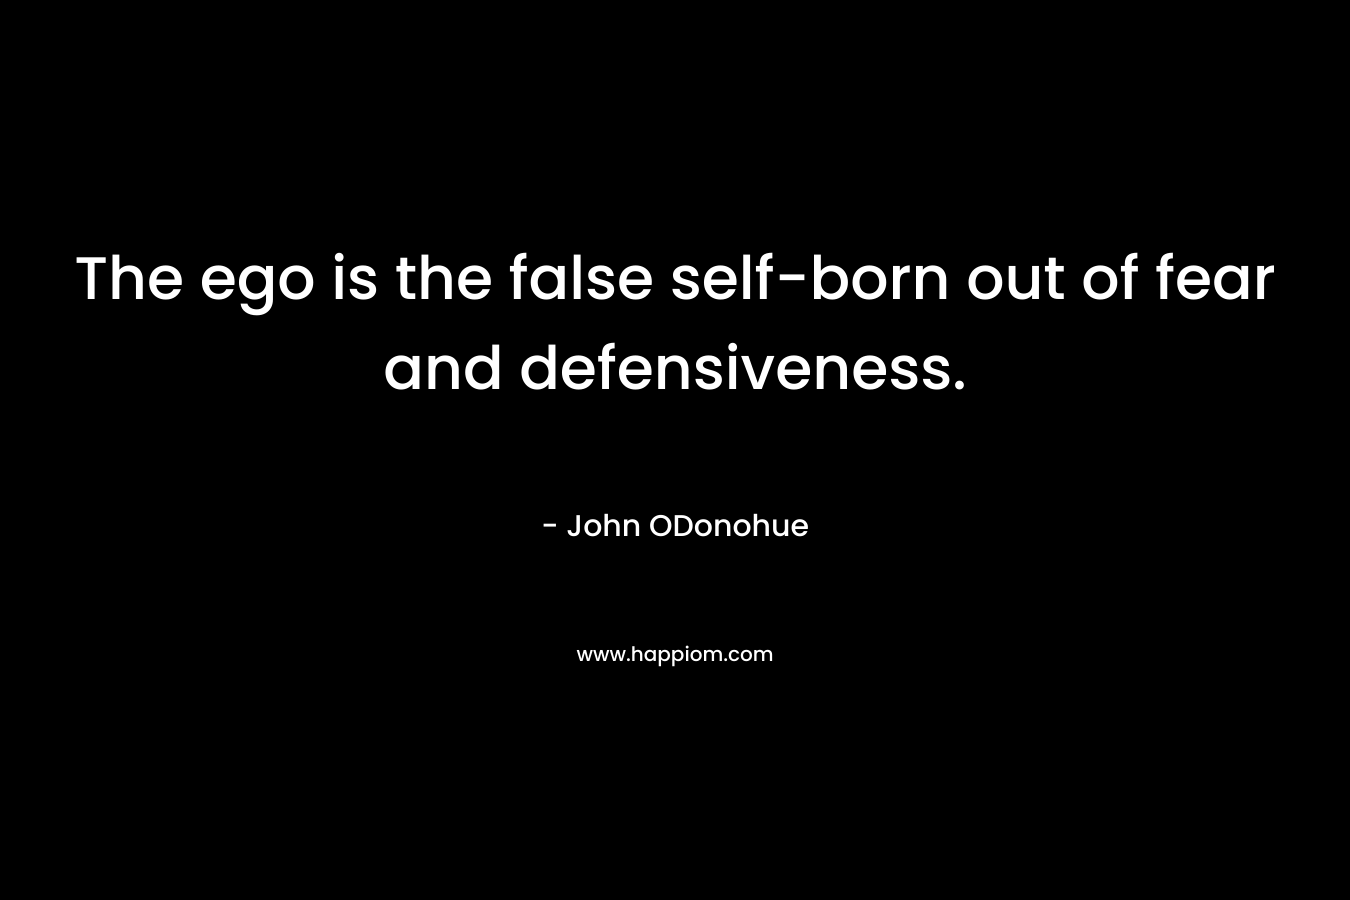 The ego is the false self-born out of fear and defensiveness. – John ODonohue